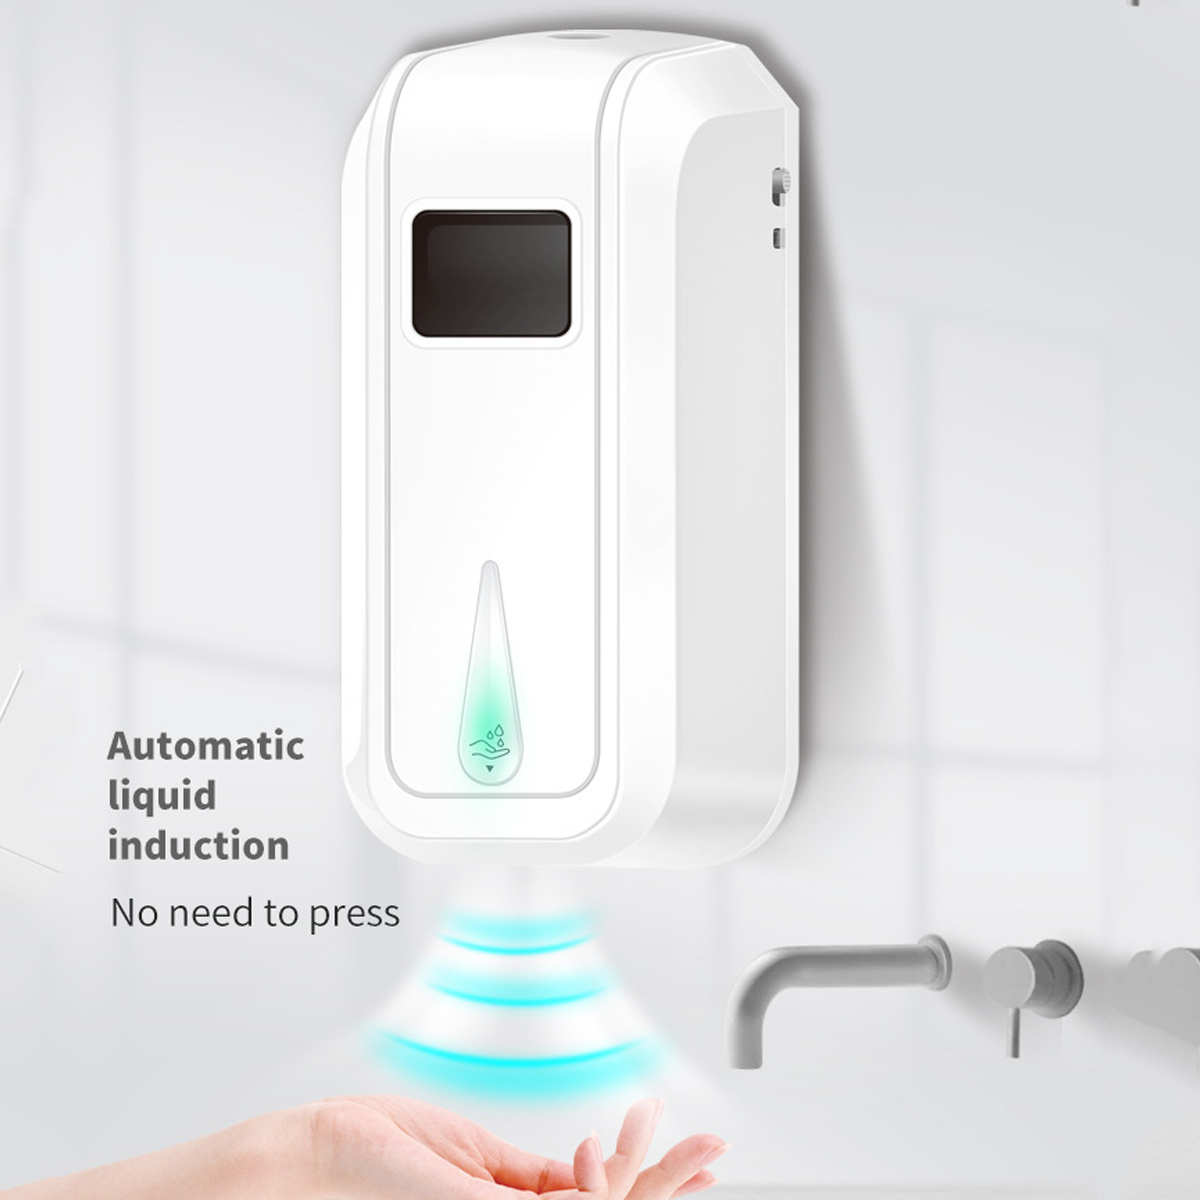 11L-Soap-Dispenser-Auto-Foam-Hand-Washer-Non-Touch-Induction-Foaming-Washer-Device-1744382-8